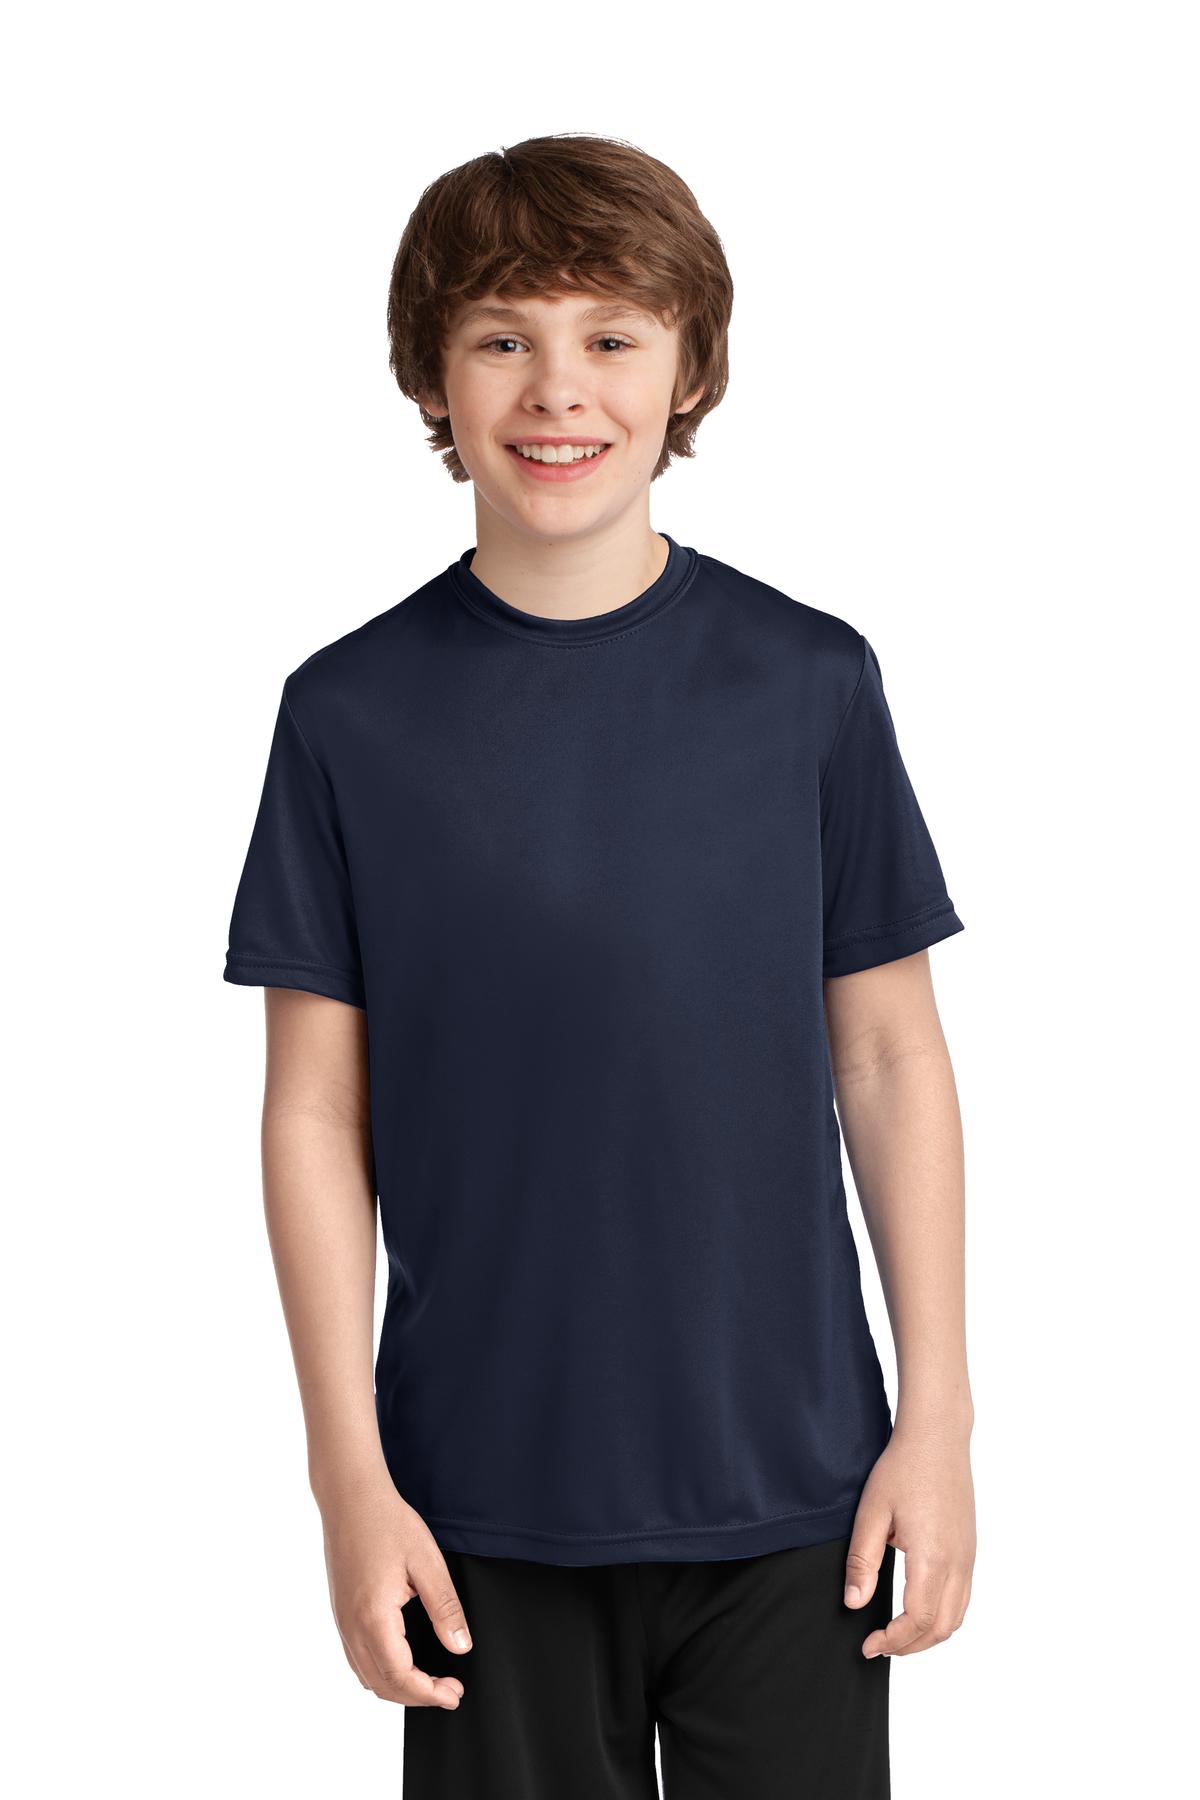 Port & Company Activewear Youth T-Shirts for Hospitality ® Youth Performance Tee.-Port & Company